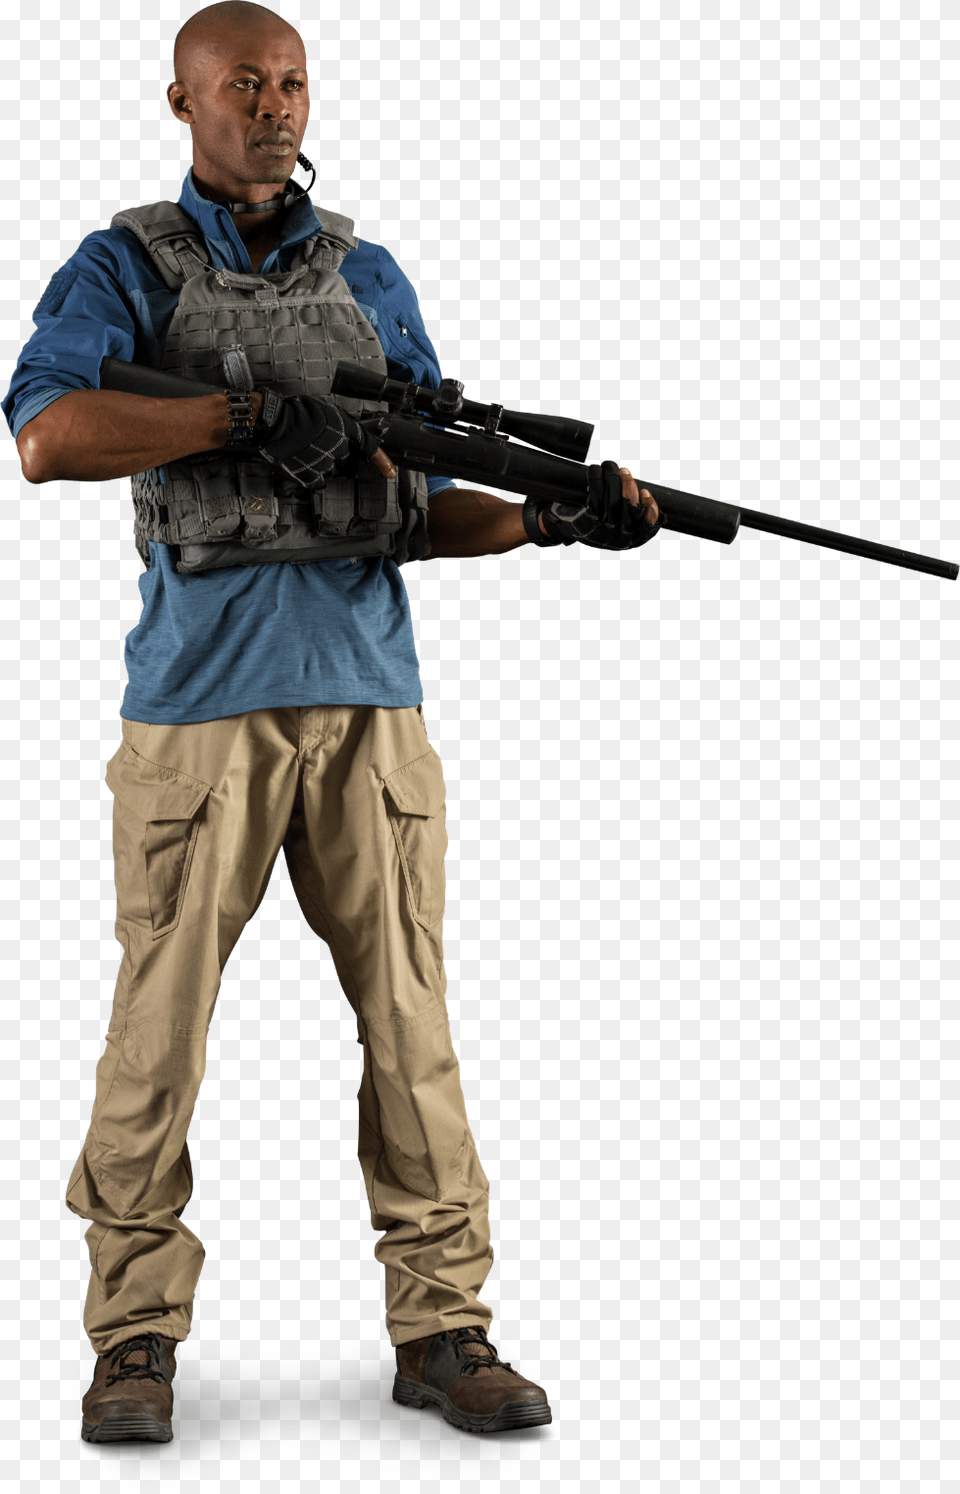 Nomad Profile View Nomad Ghost Recon Wildlands, Weapon, Rifle, Firearm, Gun Free Png Download